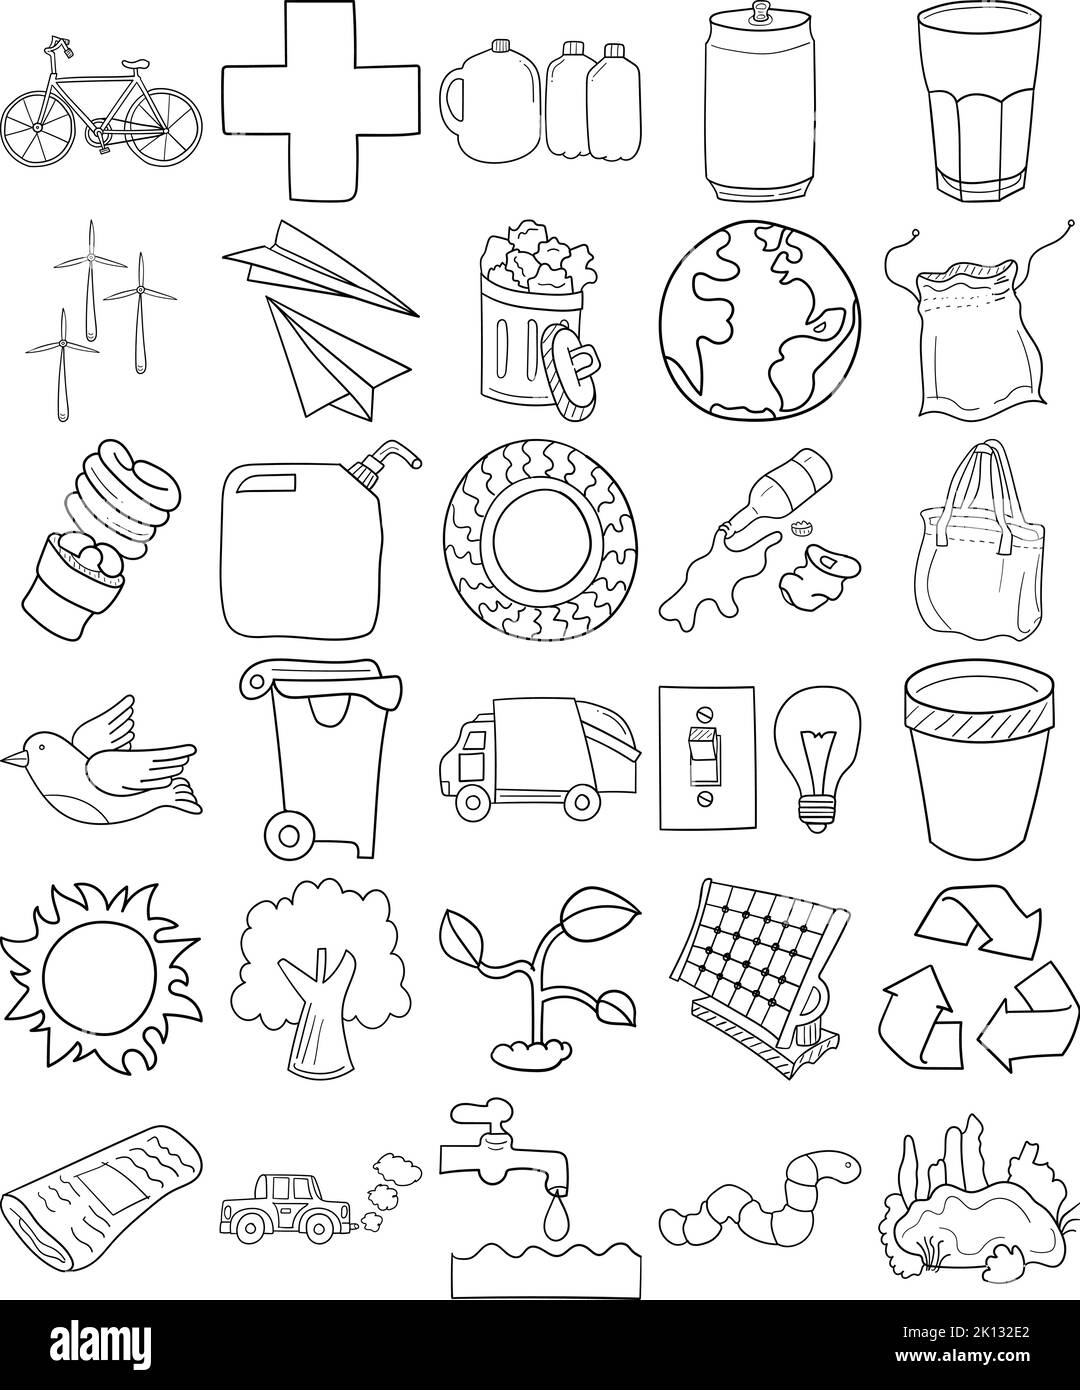 Earth Day Hand Drawn Doodle Line Art Outline Set Containing Earth, Water, Recycle, Plant, Recycle bin, Trash can, Newspaper, Plastic bottles, Glass Stock Vector